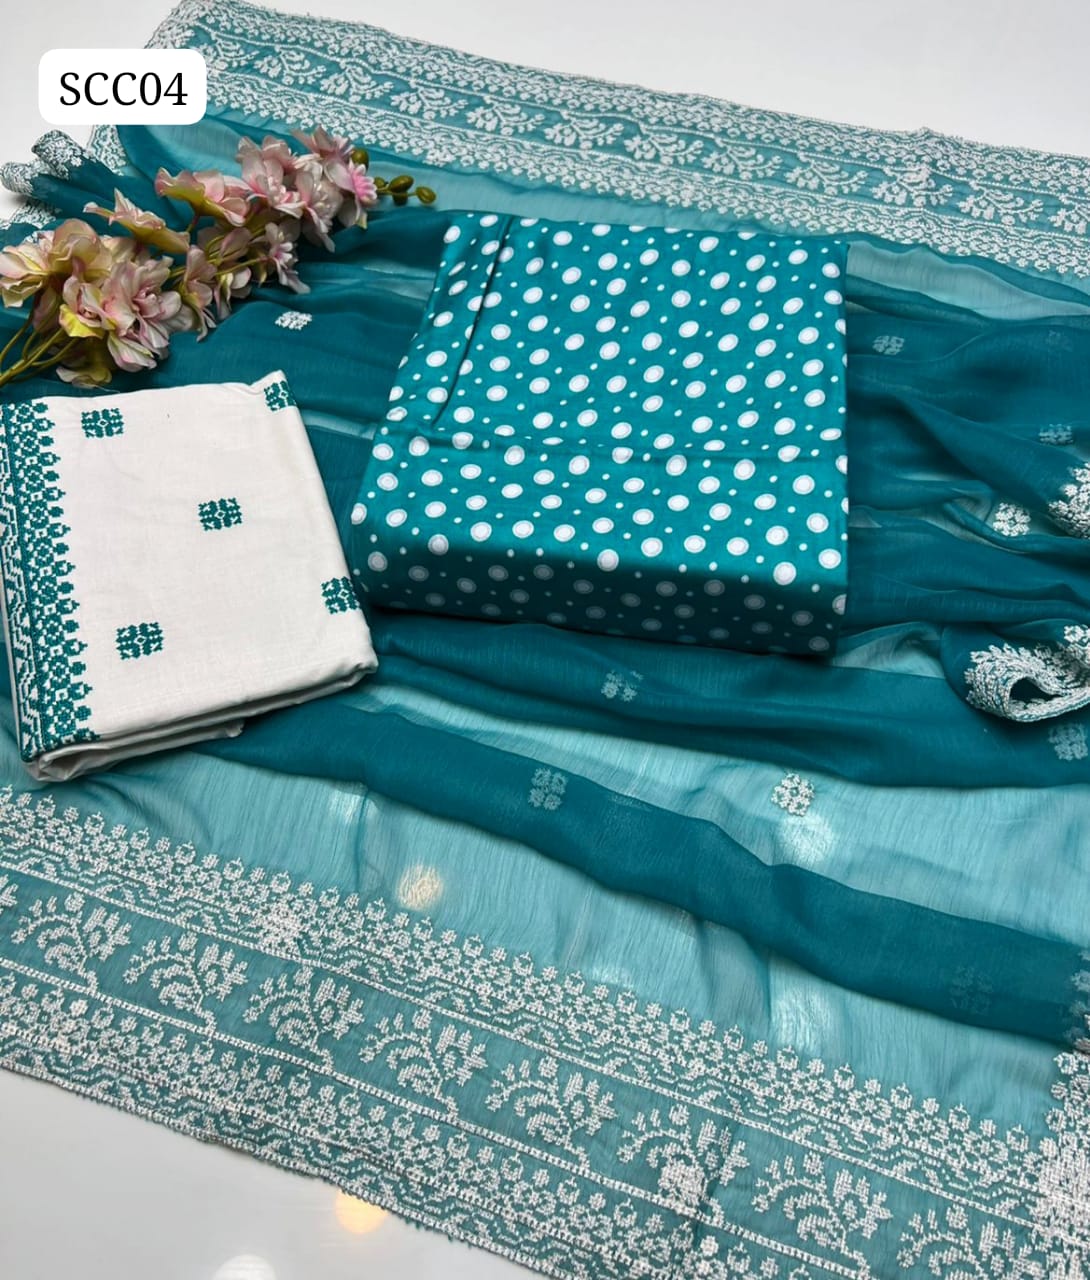 Lawn Fabric Polka Dot Print Shirt With Cut Work Embroidery Chiffion Duppata And Cut Work Flower Embroidery Lawn Trouser 3 Pc Dress